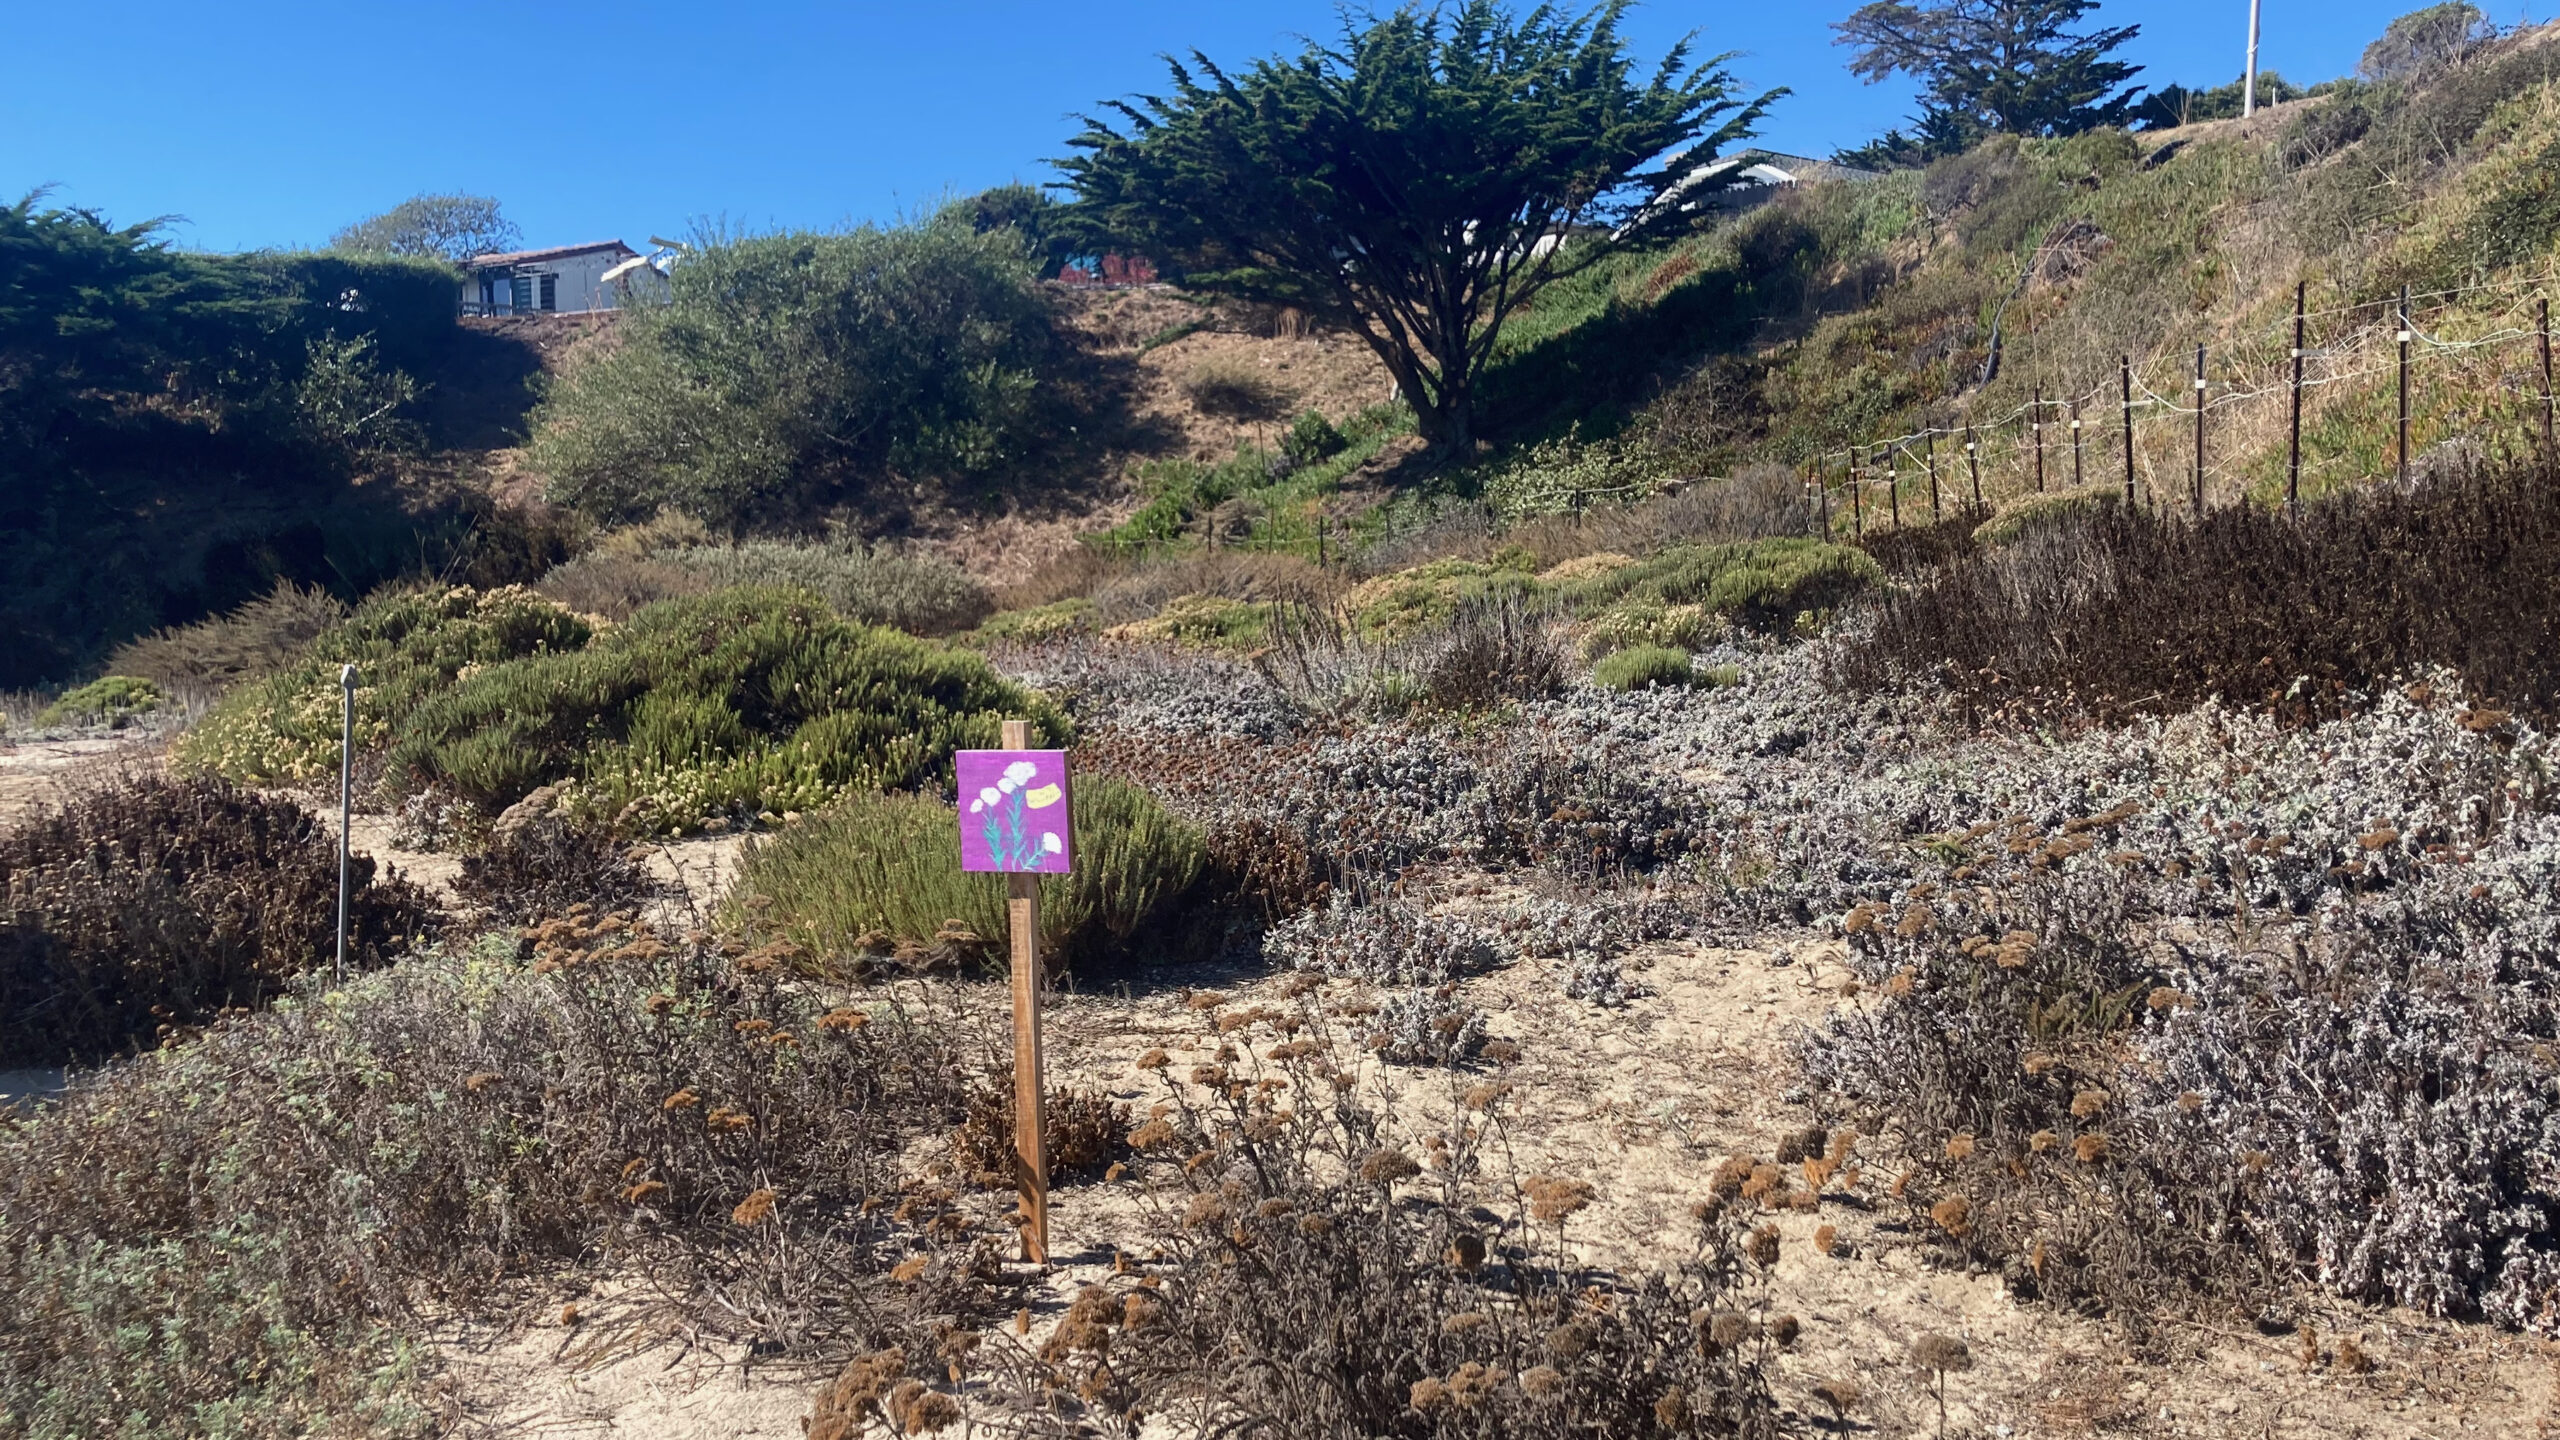 A dune restoration area at Seabright Beach next to a bluff. In the foreground, clumps of foot-high plants grow in the sand around a small, hand-painted sign of flowers. In the background, a fence surrounds the plants and the base of the bluff.